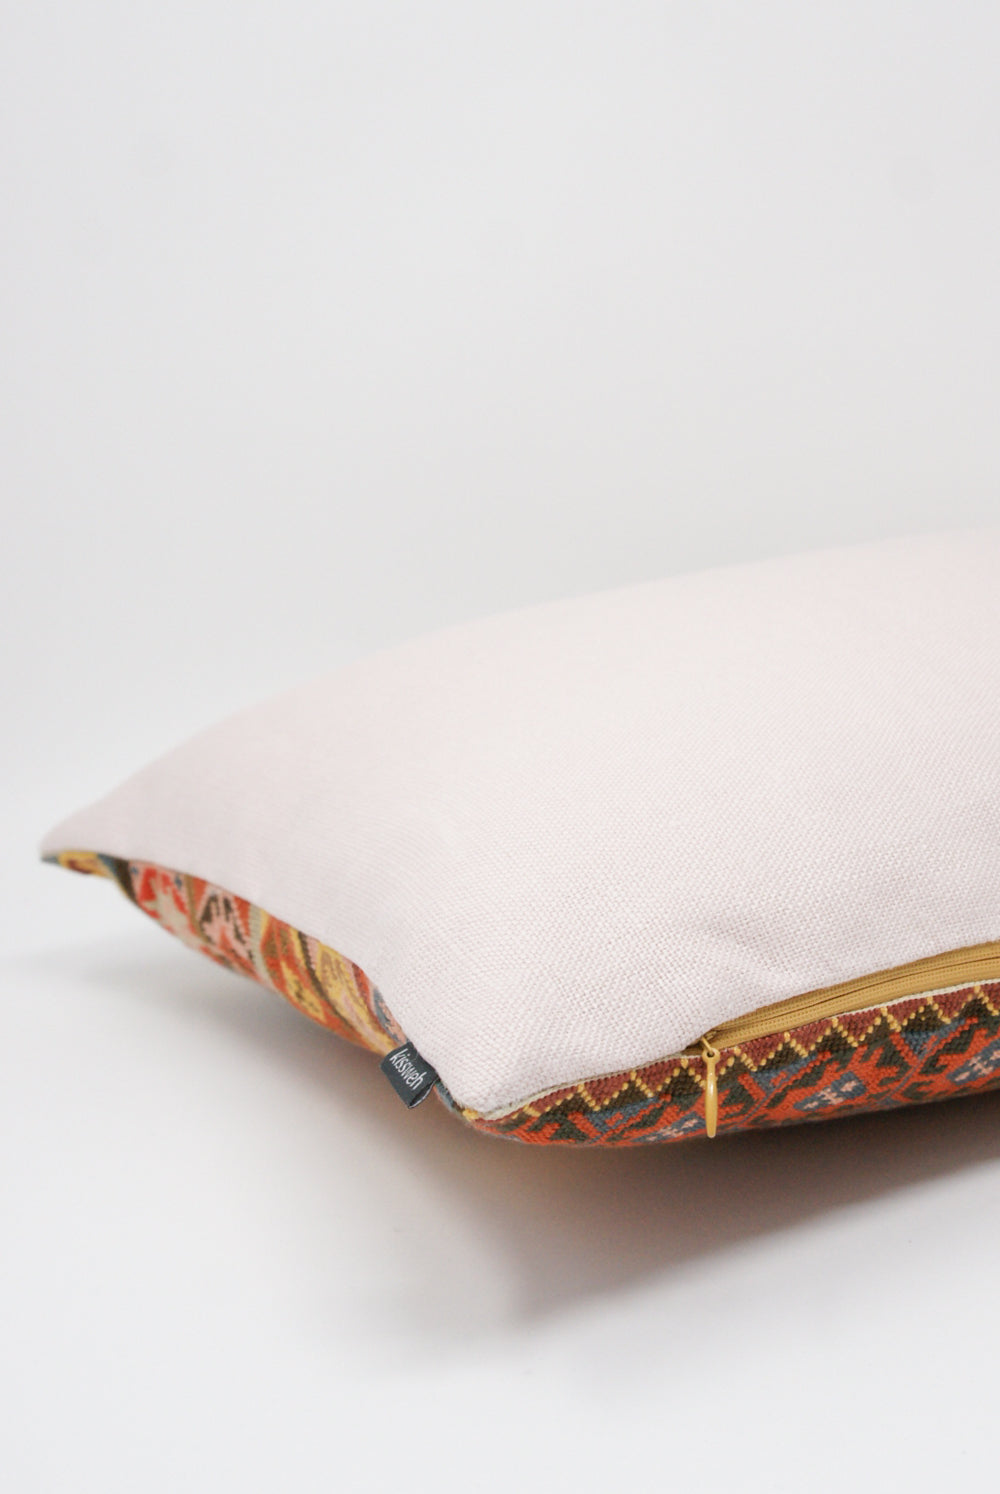 Kissweh Wafa'a Hand Embroidered Pillow in Autumn A zipper detail